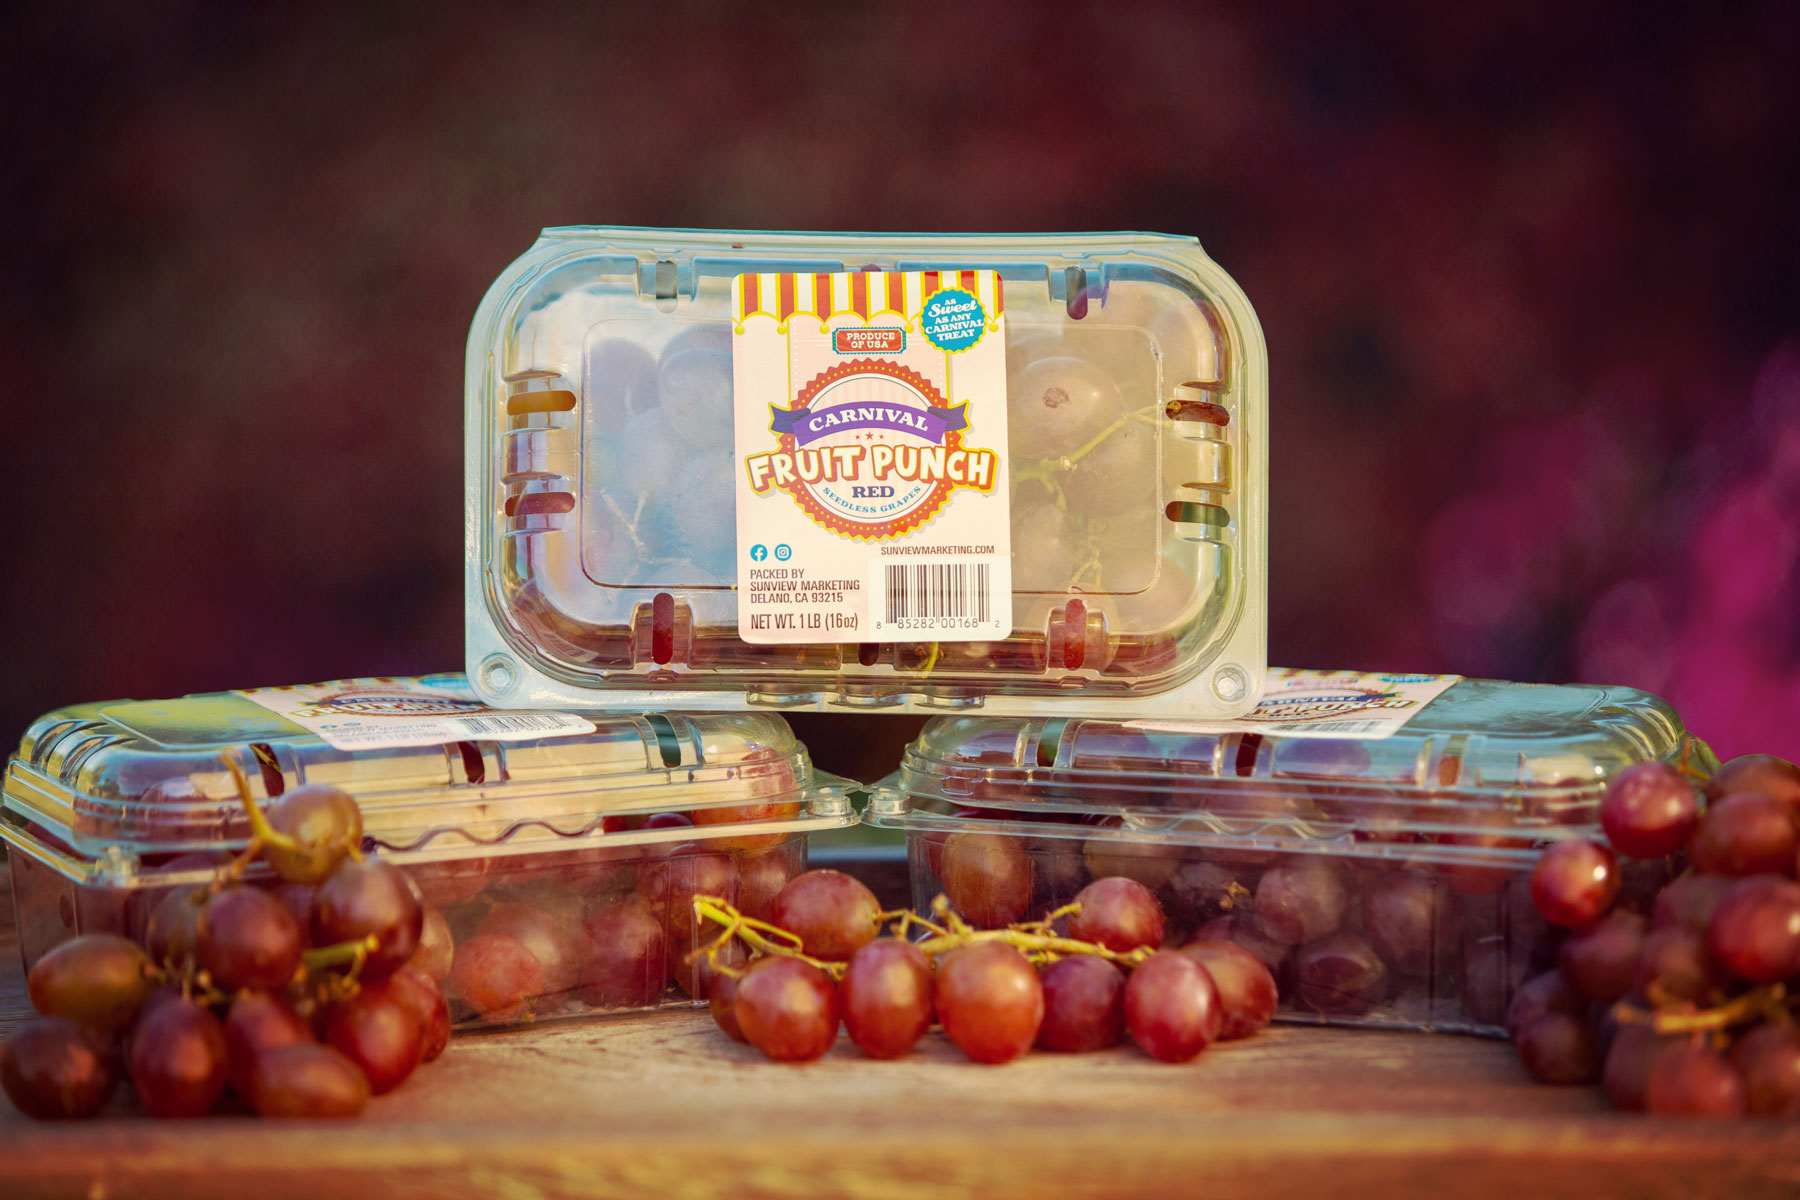 Packages of Carnival Fruit Punch Red Grapes